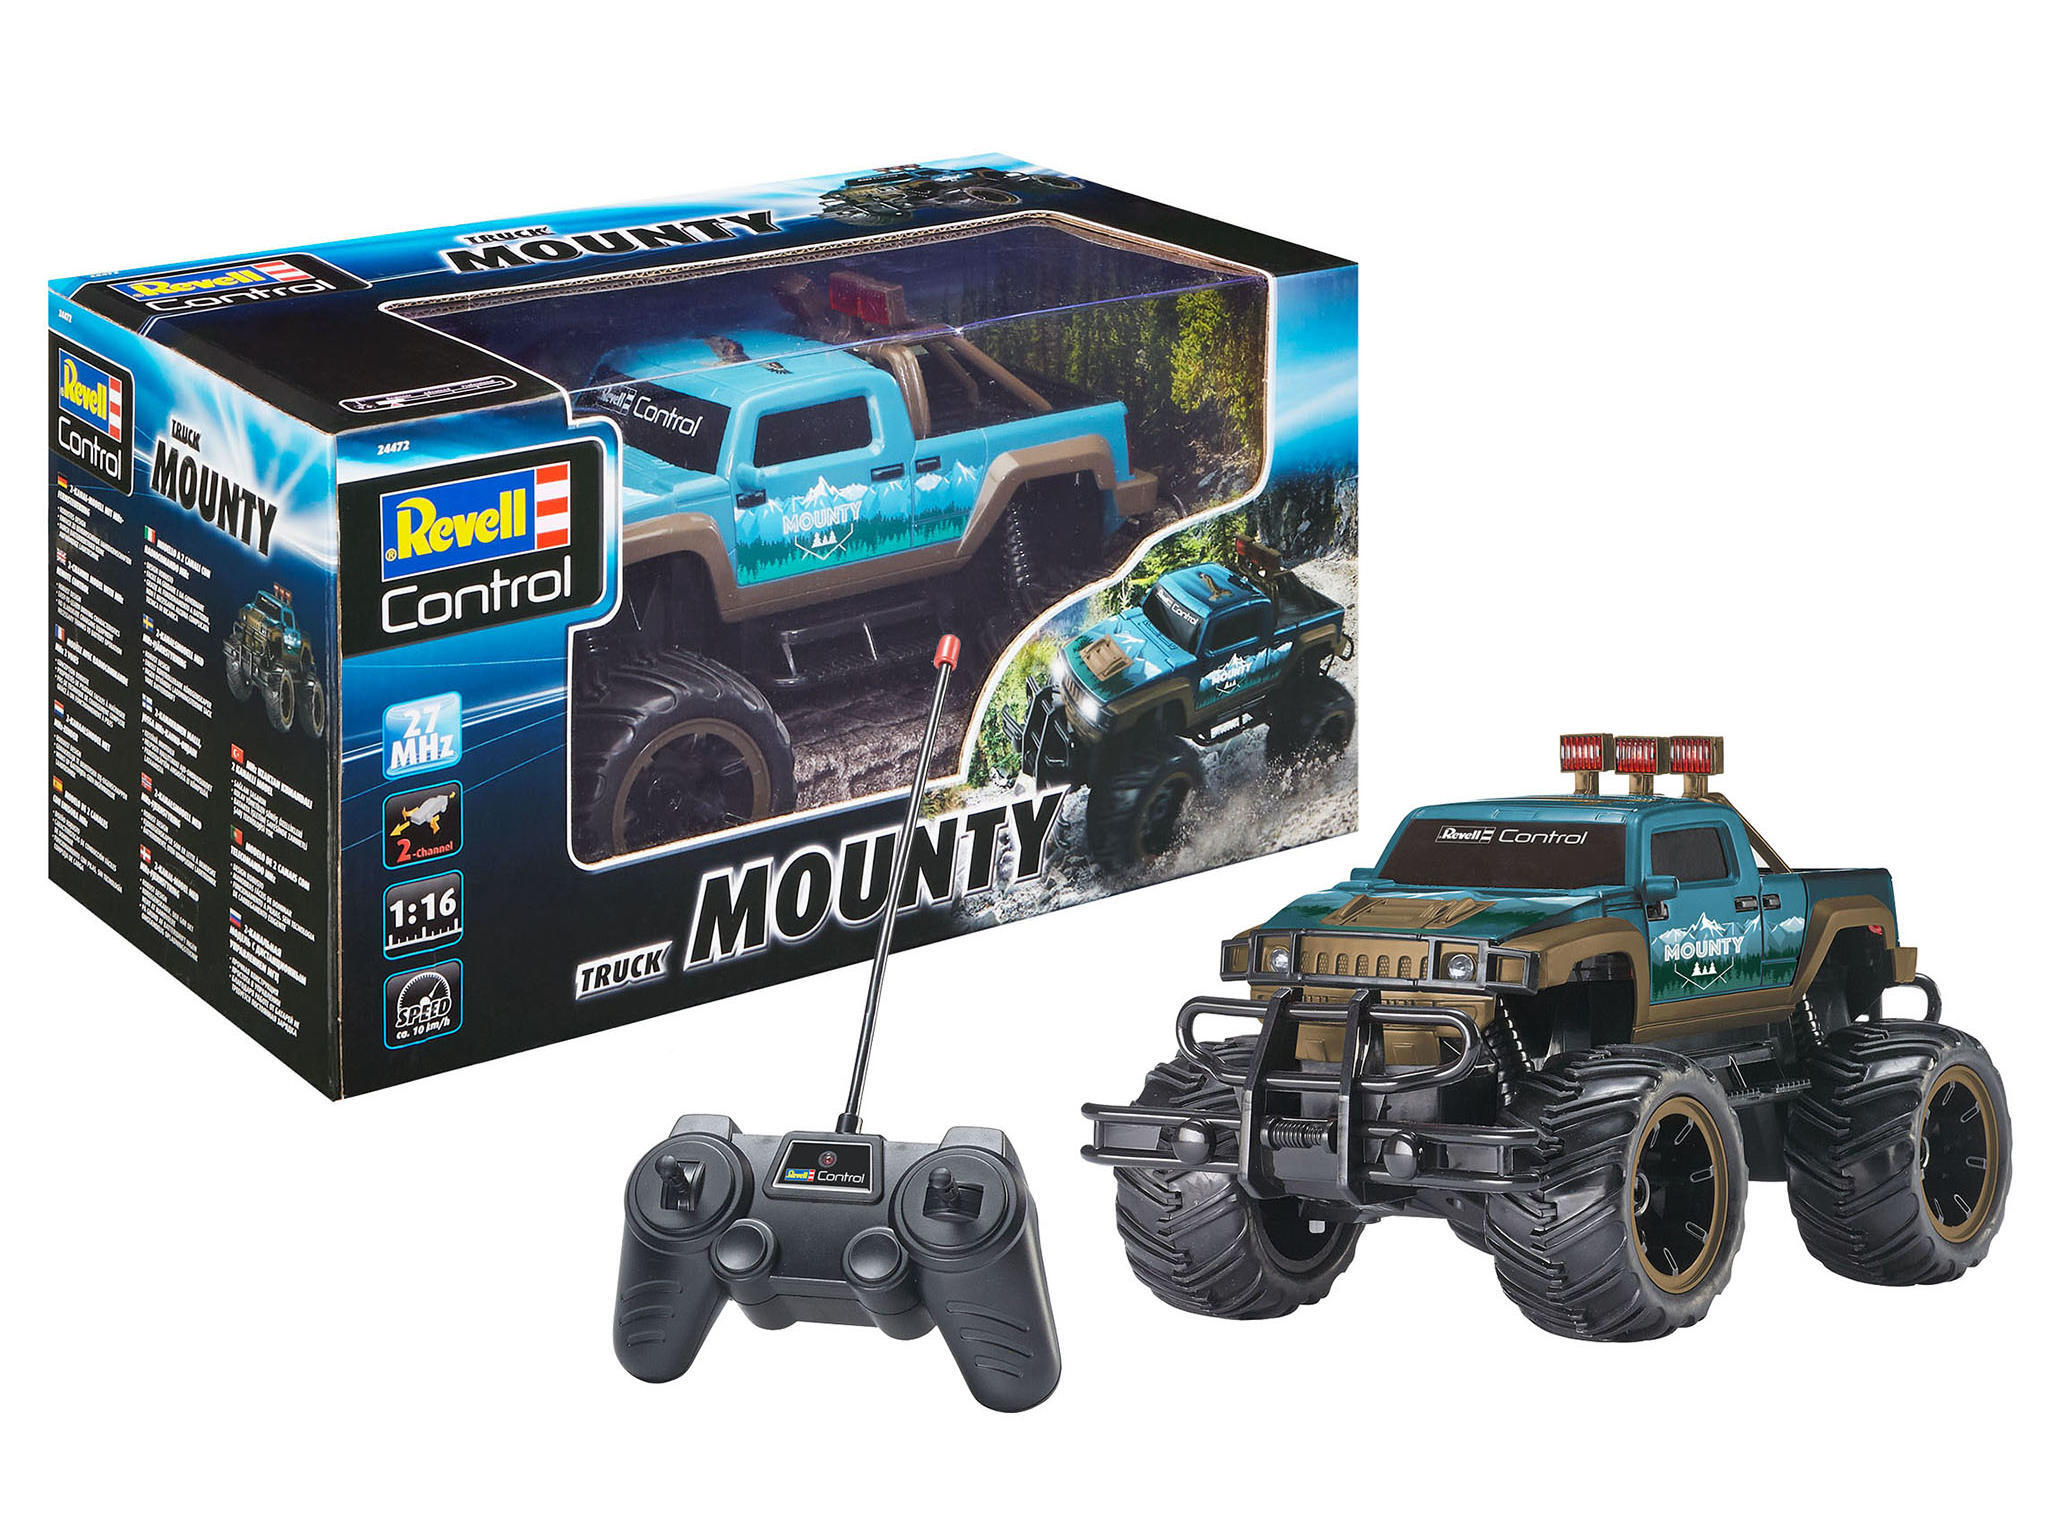 Revell 24472 RC Truck "Mounty" Revell Control Ferngesteuertes Auto